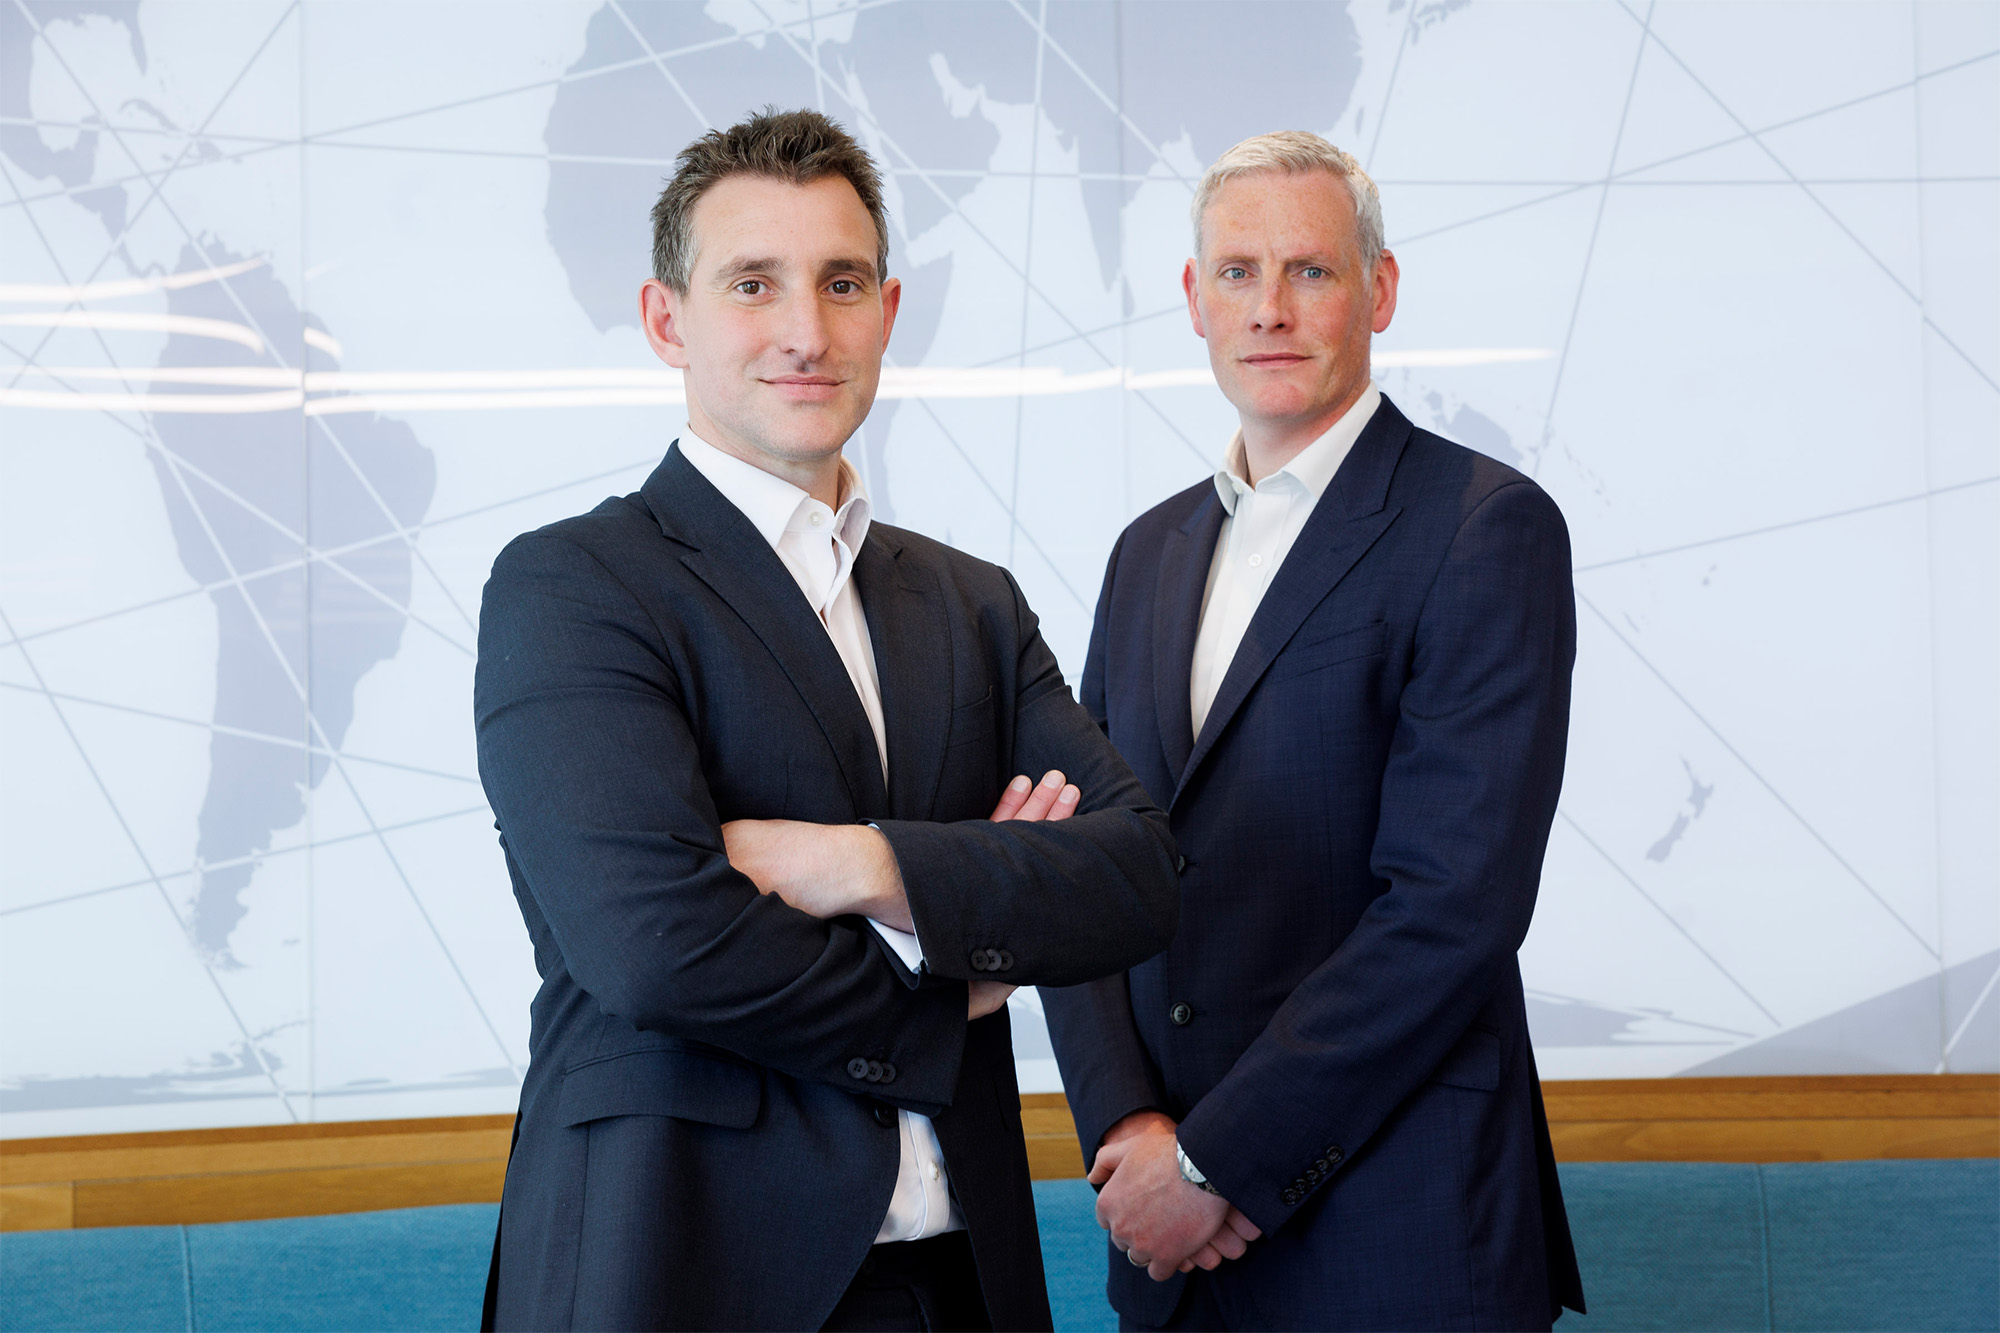 Simmons & Simmons welcomes Micheál Mulvey as corporate partner